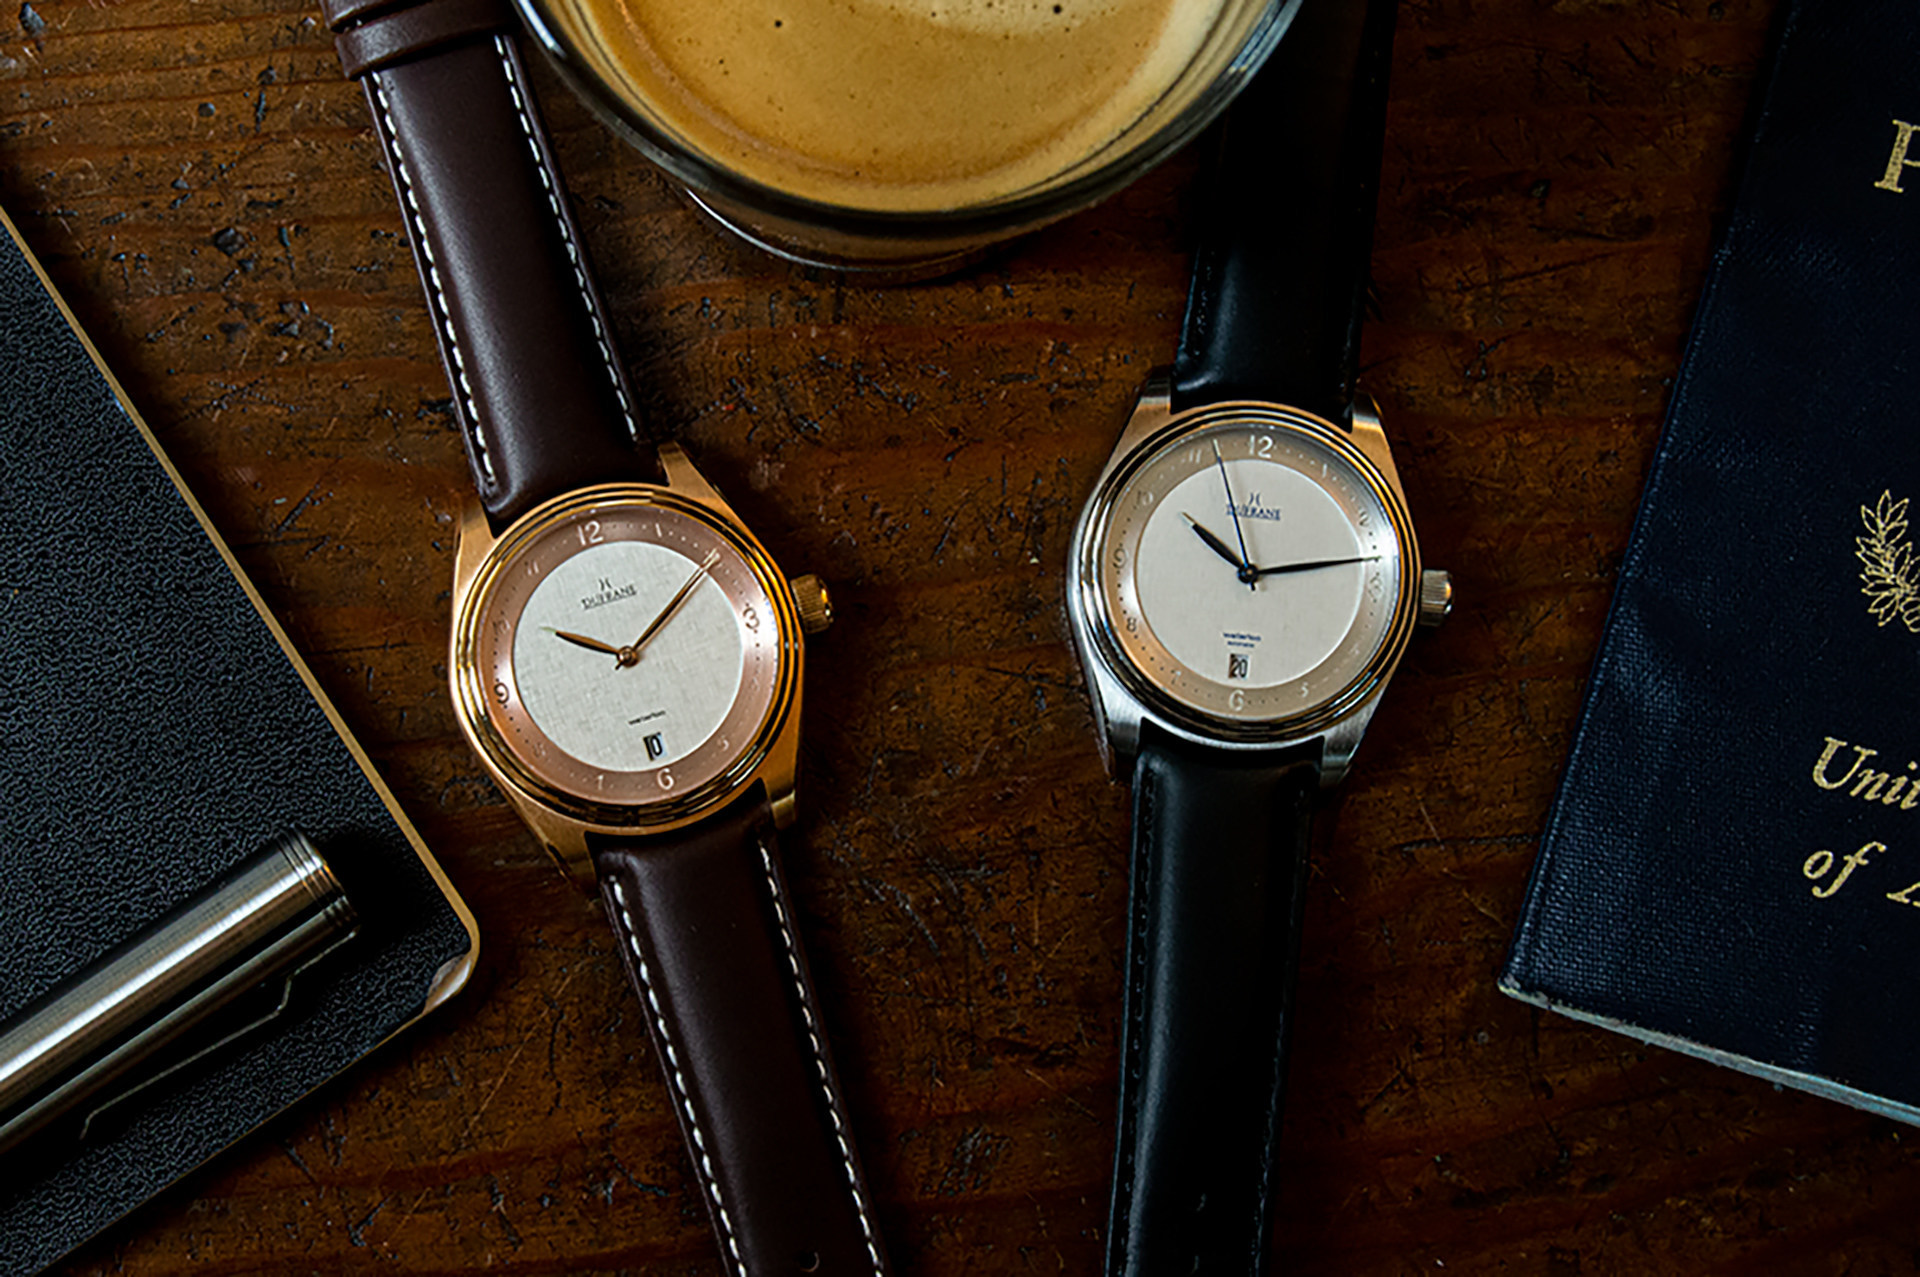 New watch release; The Waterloo is available in four variations.